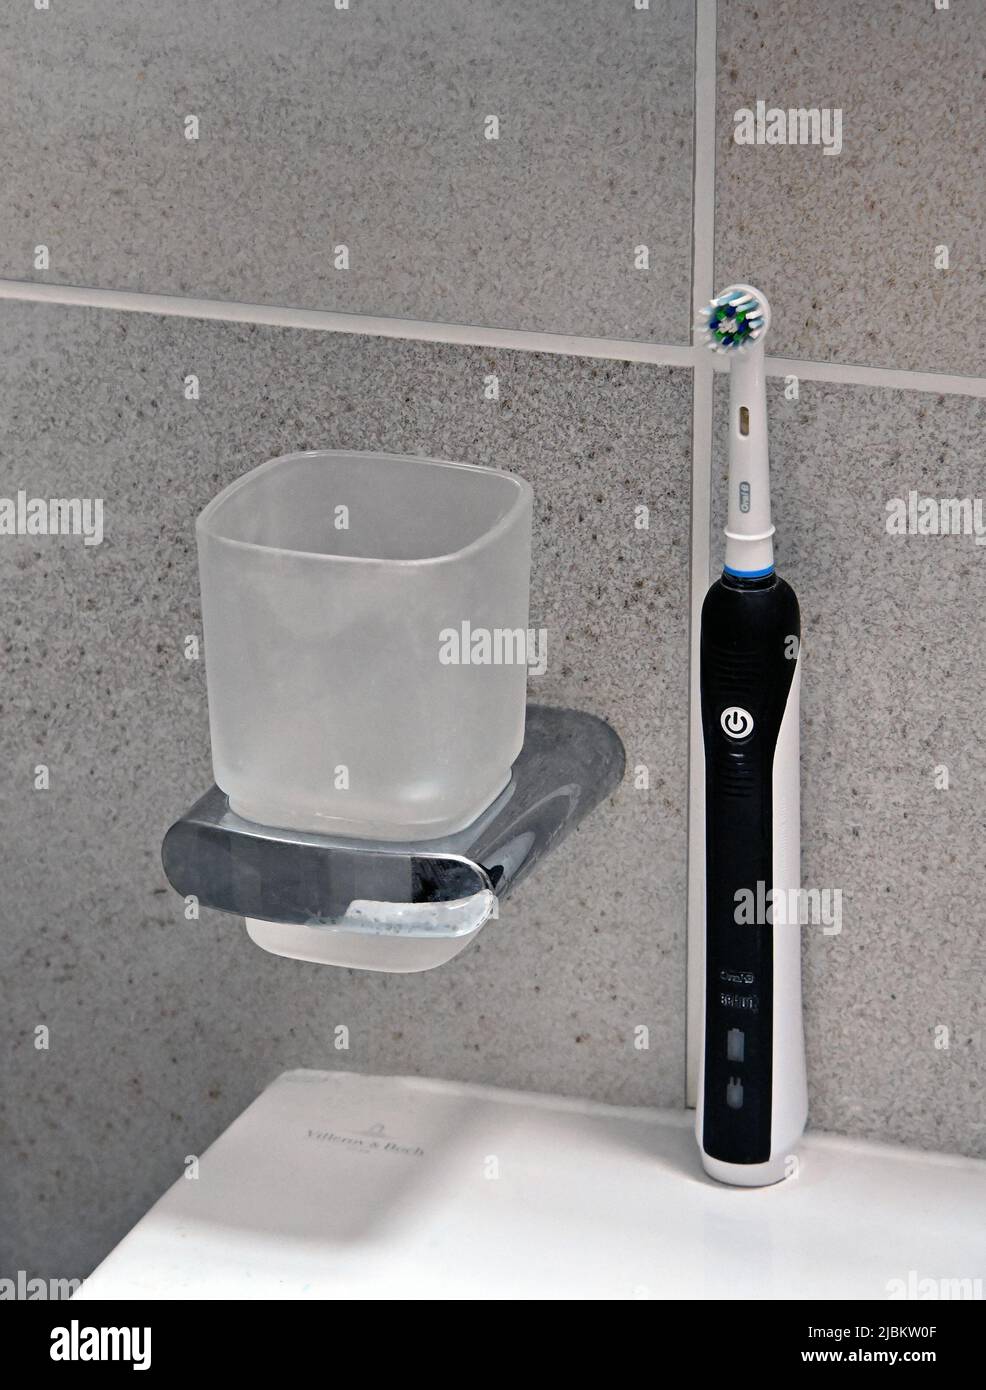 Oral B electric toothbrush and water glass in tiled bathroom. Stock Photo